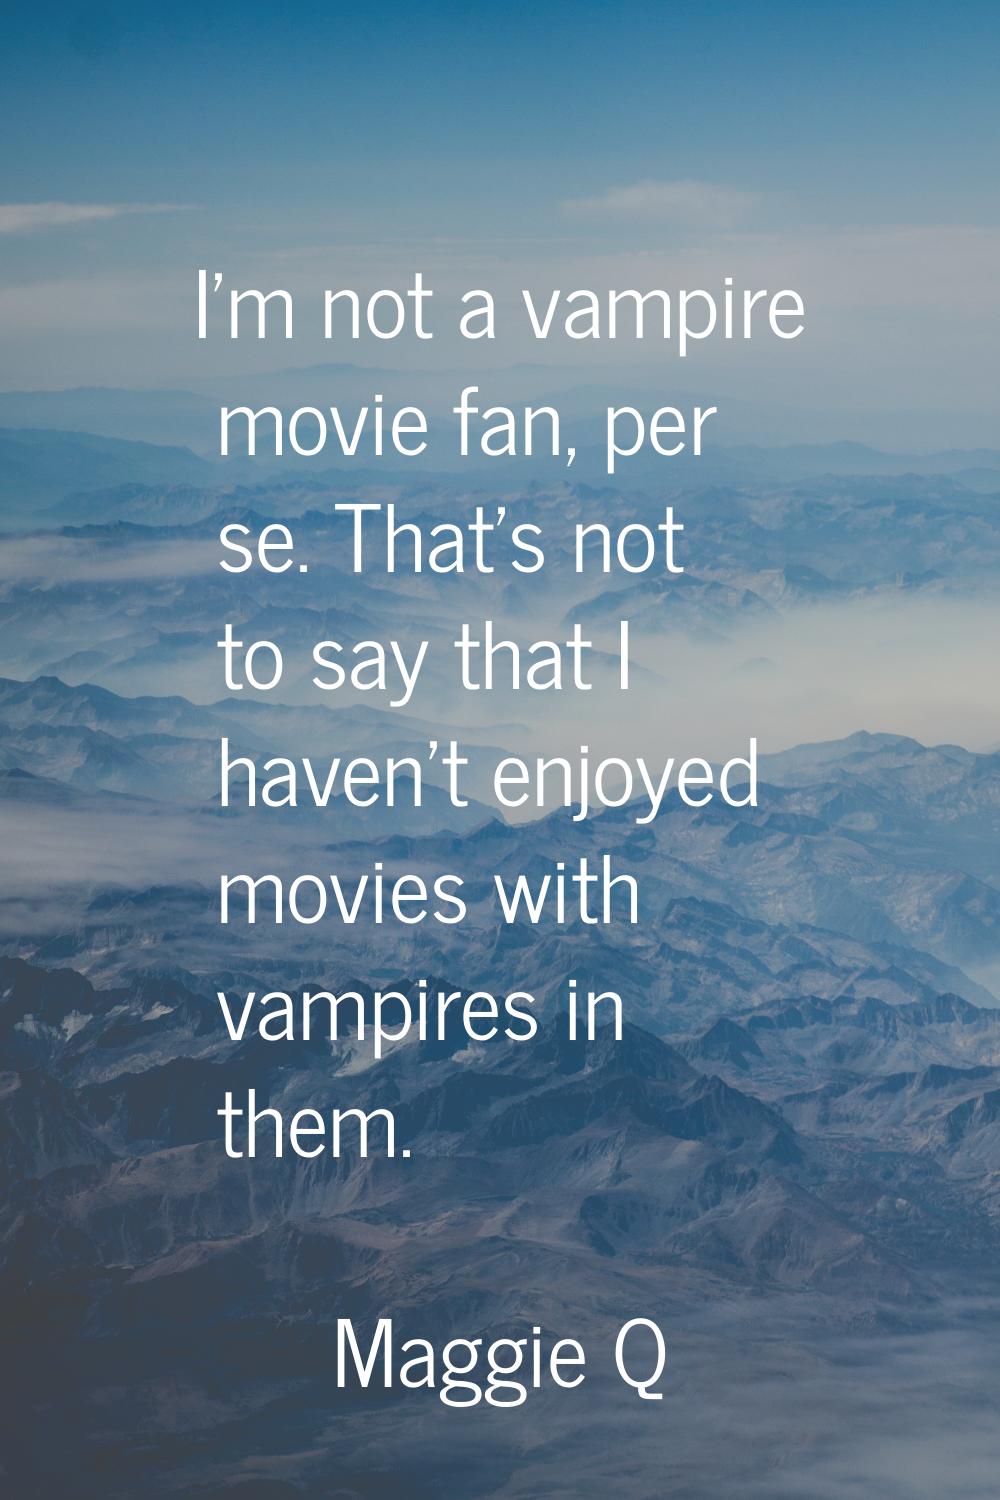 I'm not a vampire movie fan, per se. That's not to say that I haven't enjoyed movies with vampires 